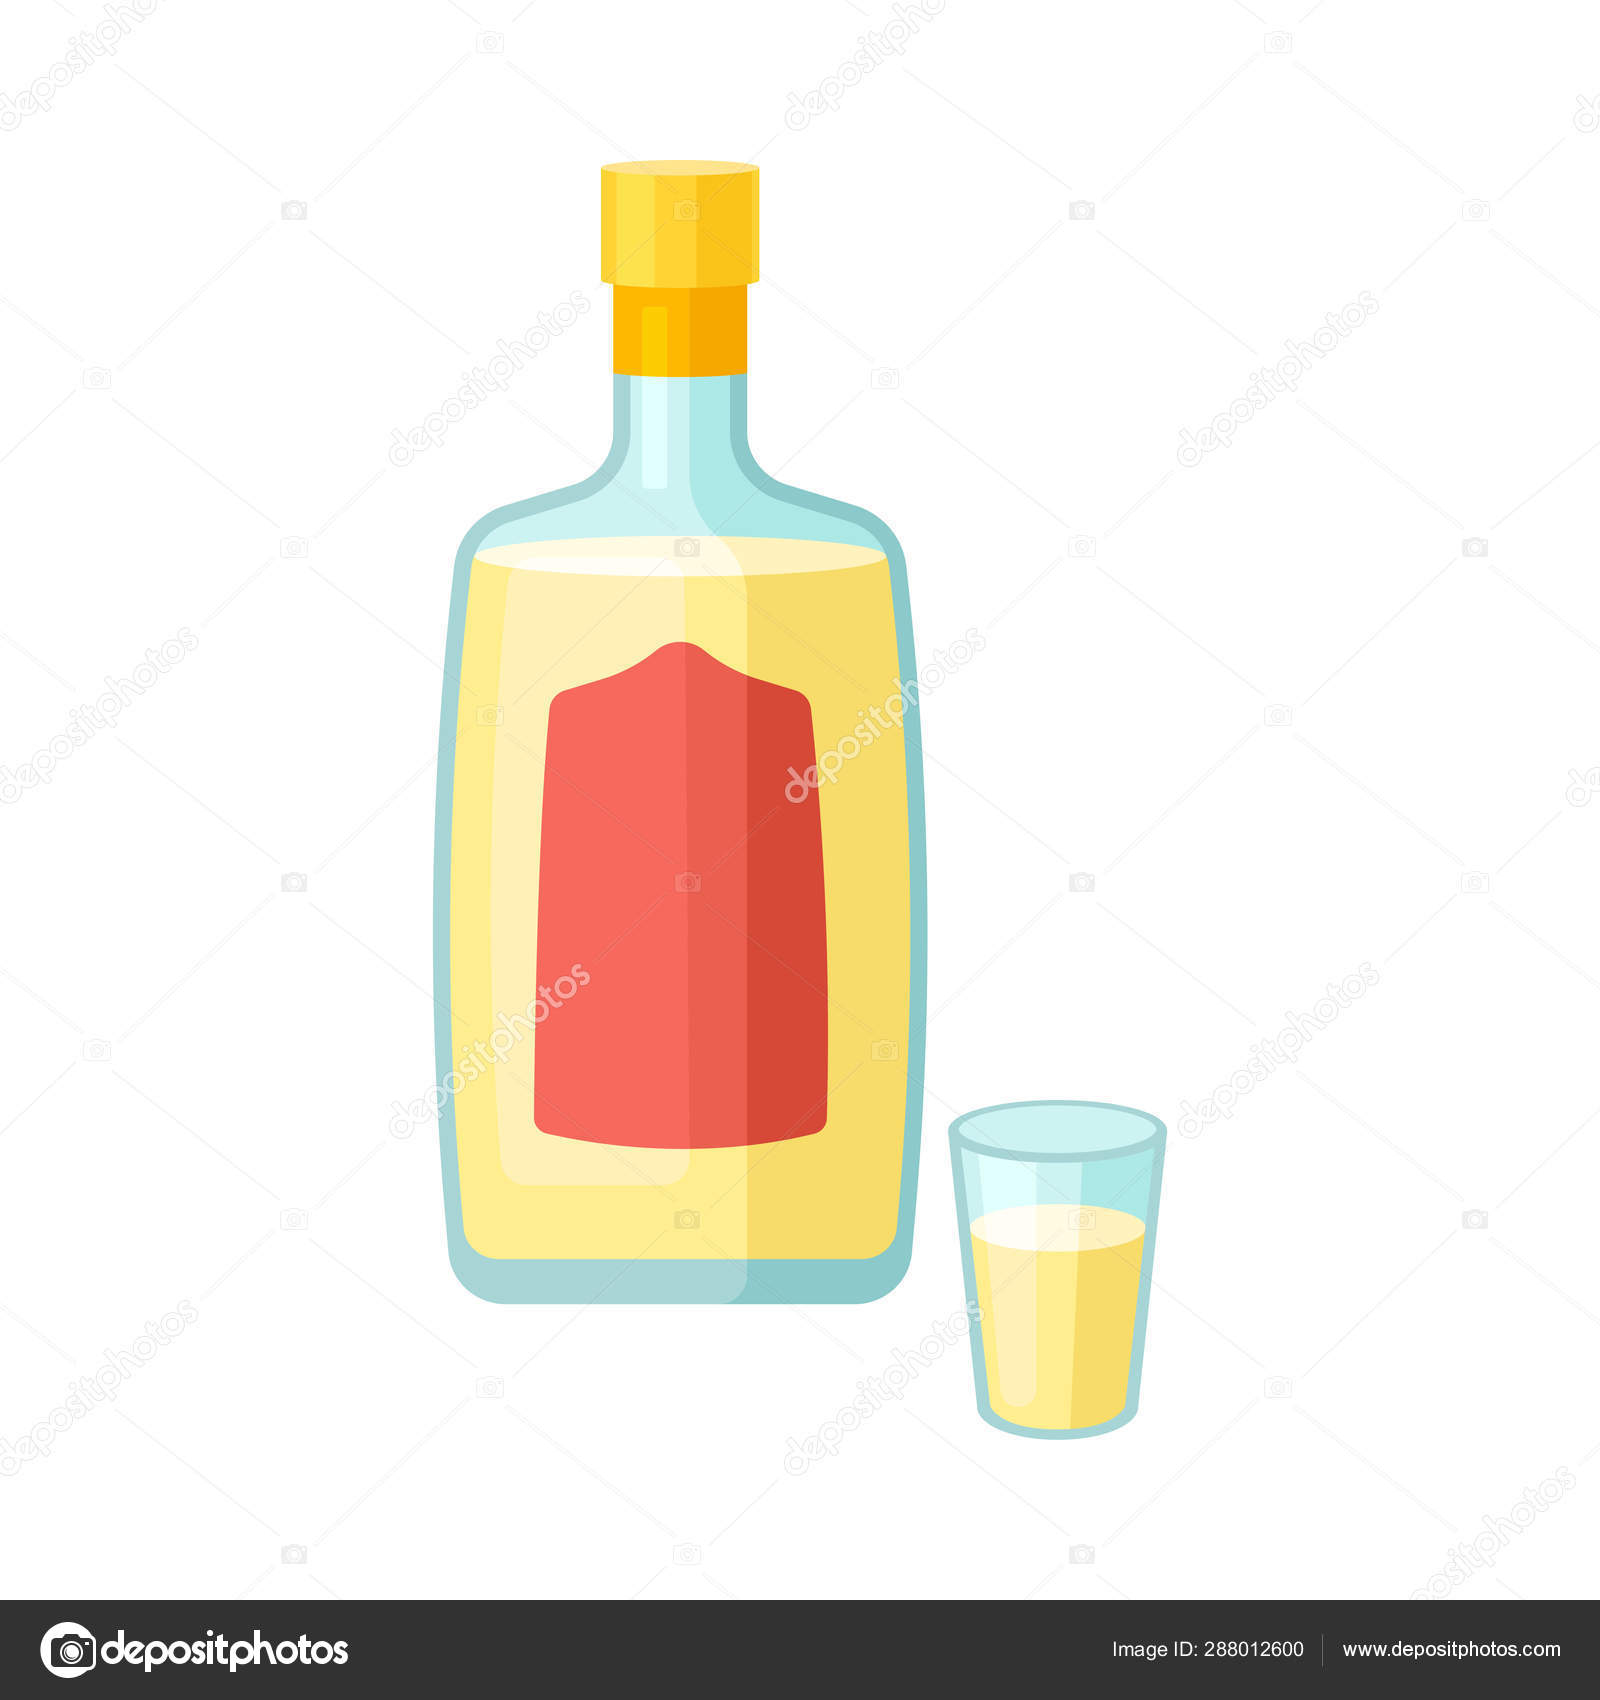 Download Glass Bottle With Yellow Liquid Vector Illustration On White Background Stock Vector C Happypictures 288012600 Yellowimages Mockups